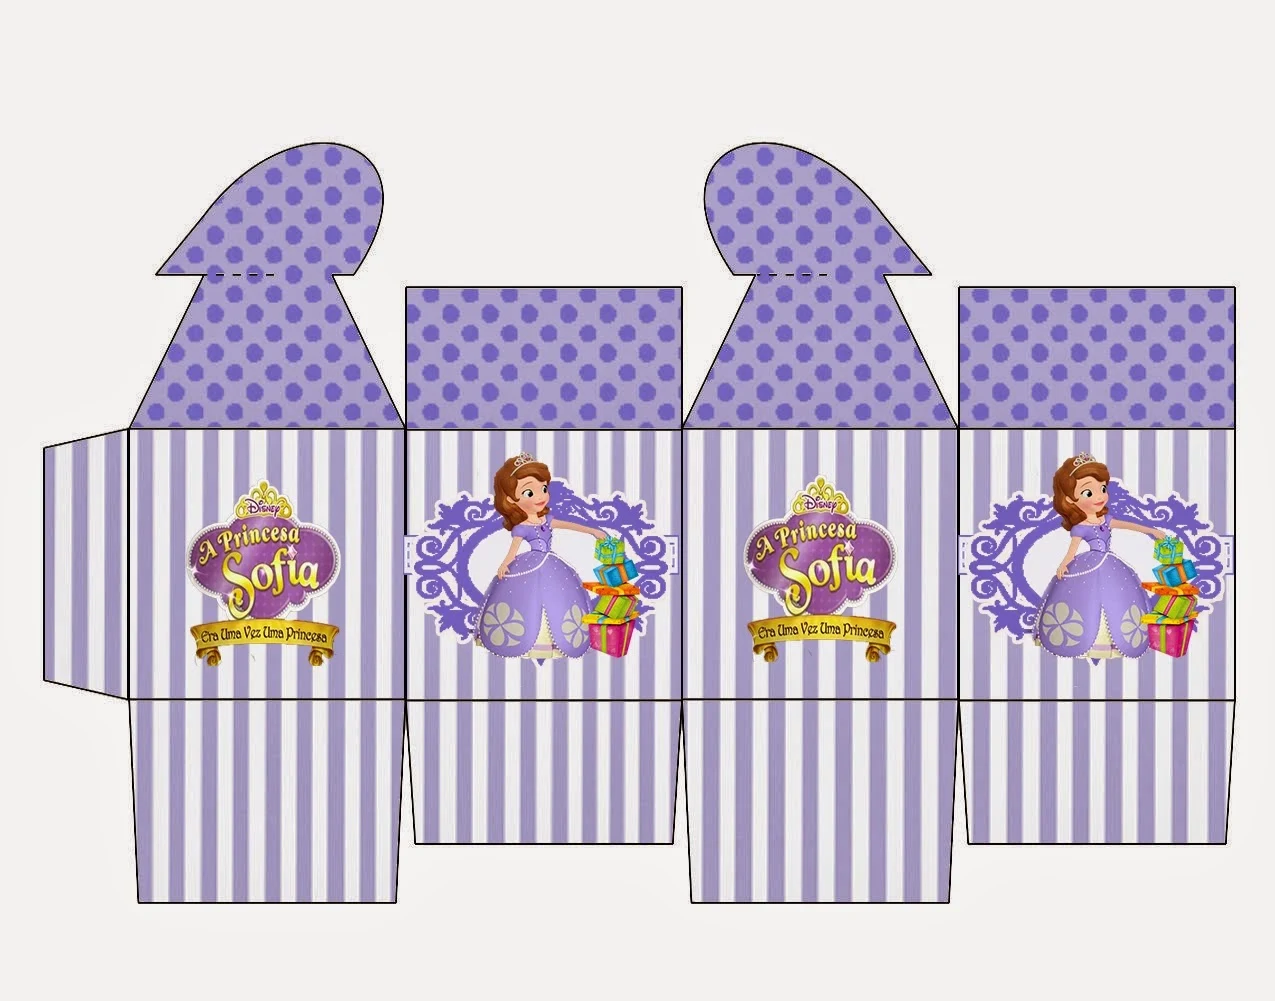 Sofia the First Free Printable Box with Heart Closure.